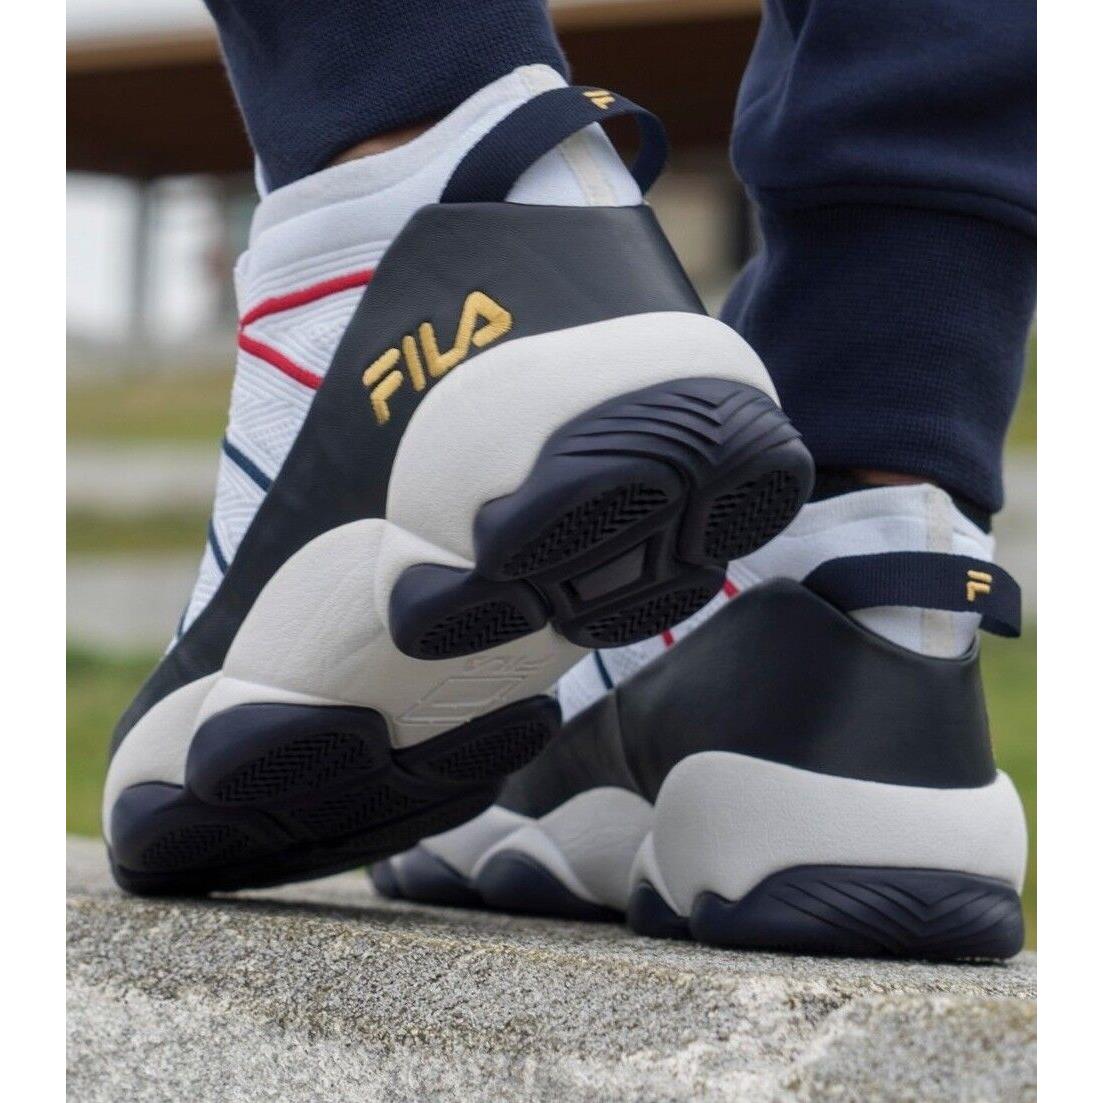 Fila shoes  - RED WHITE BLUE GOLD 0